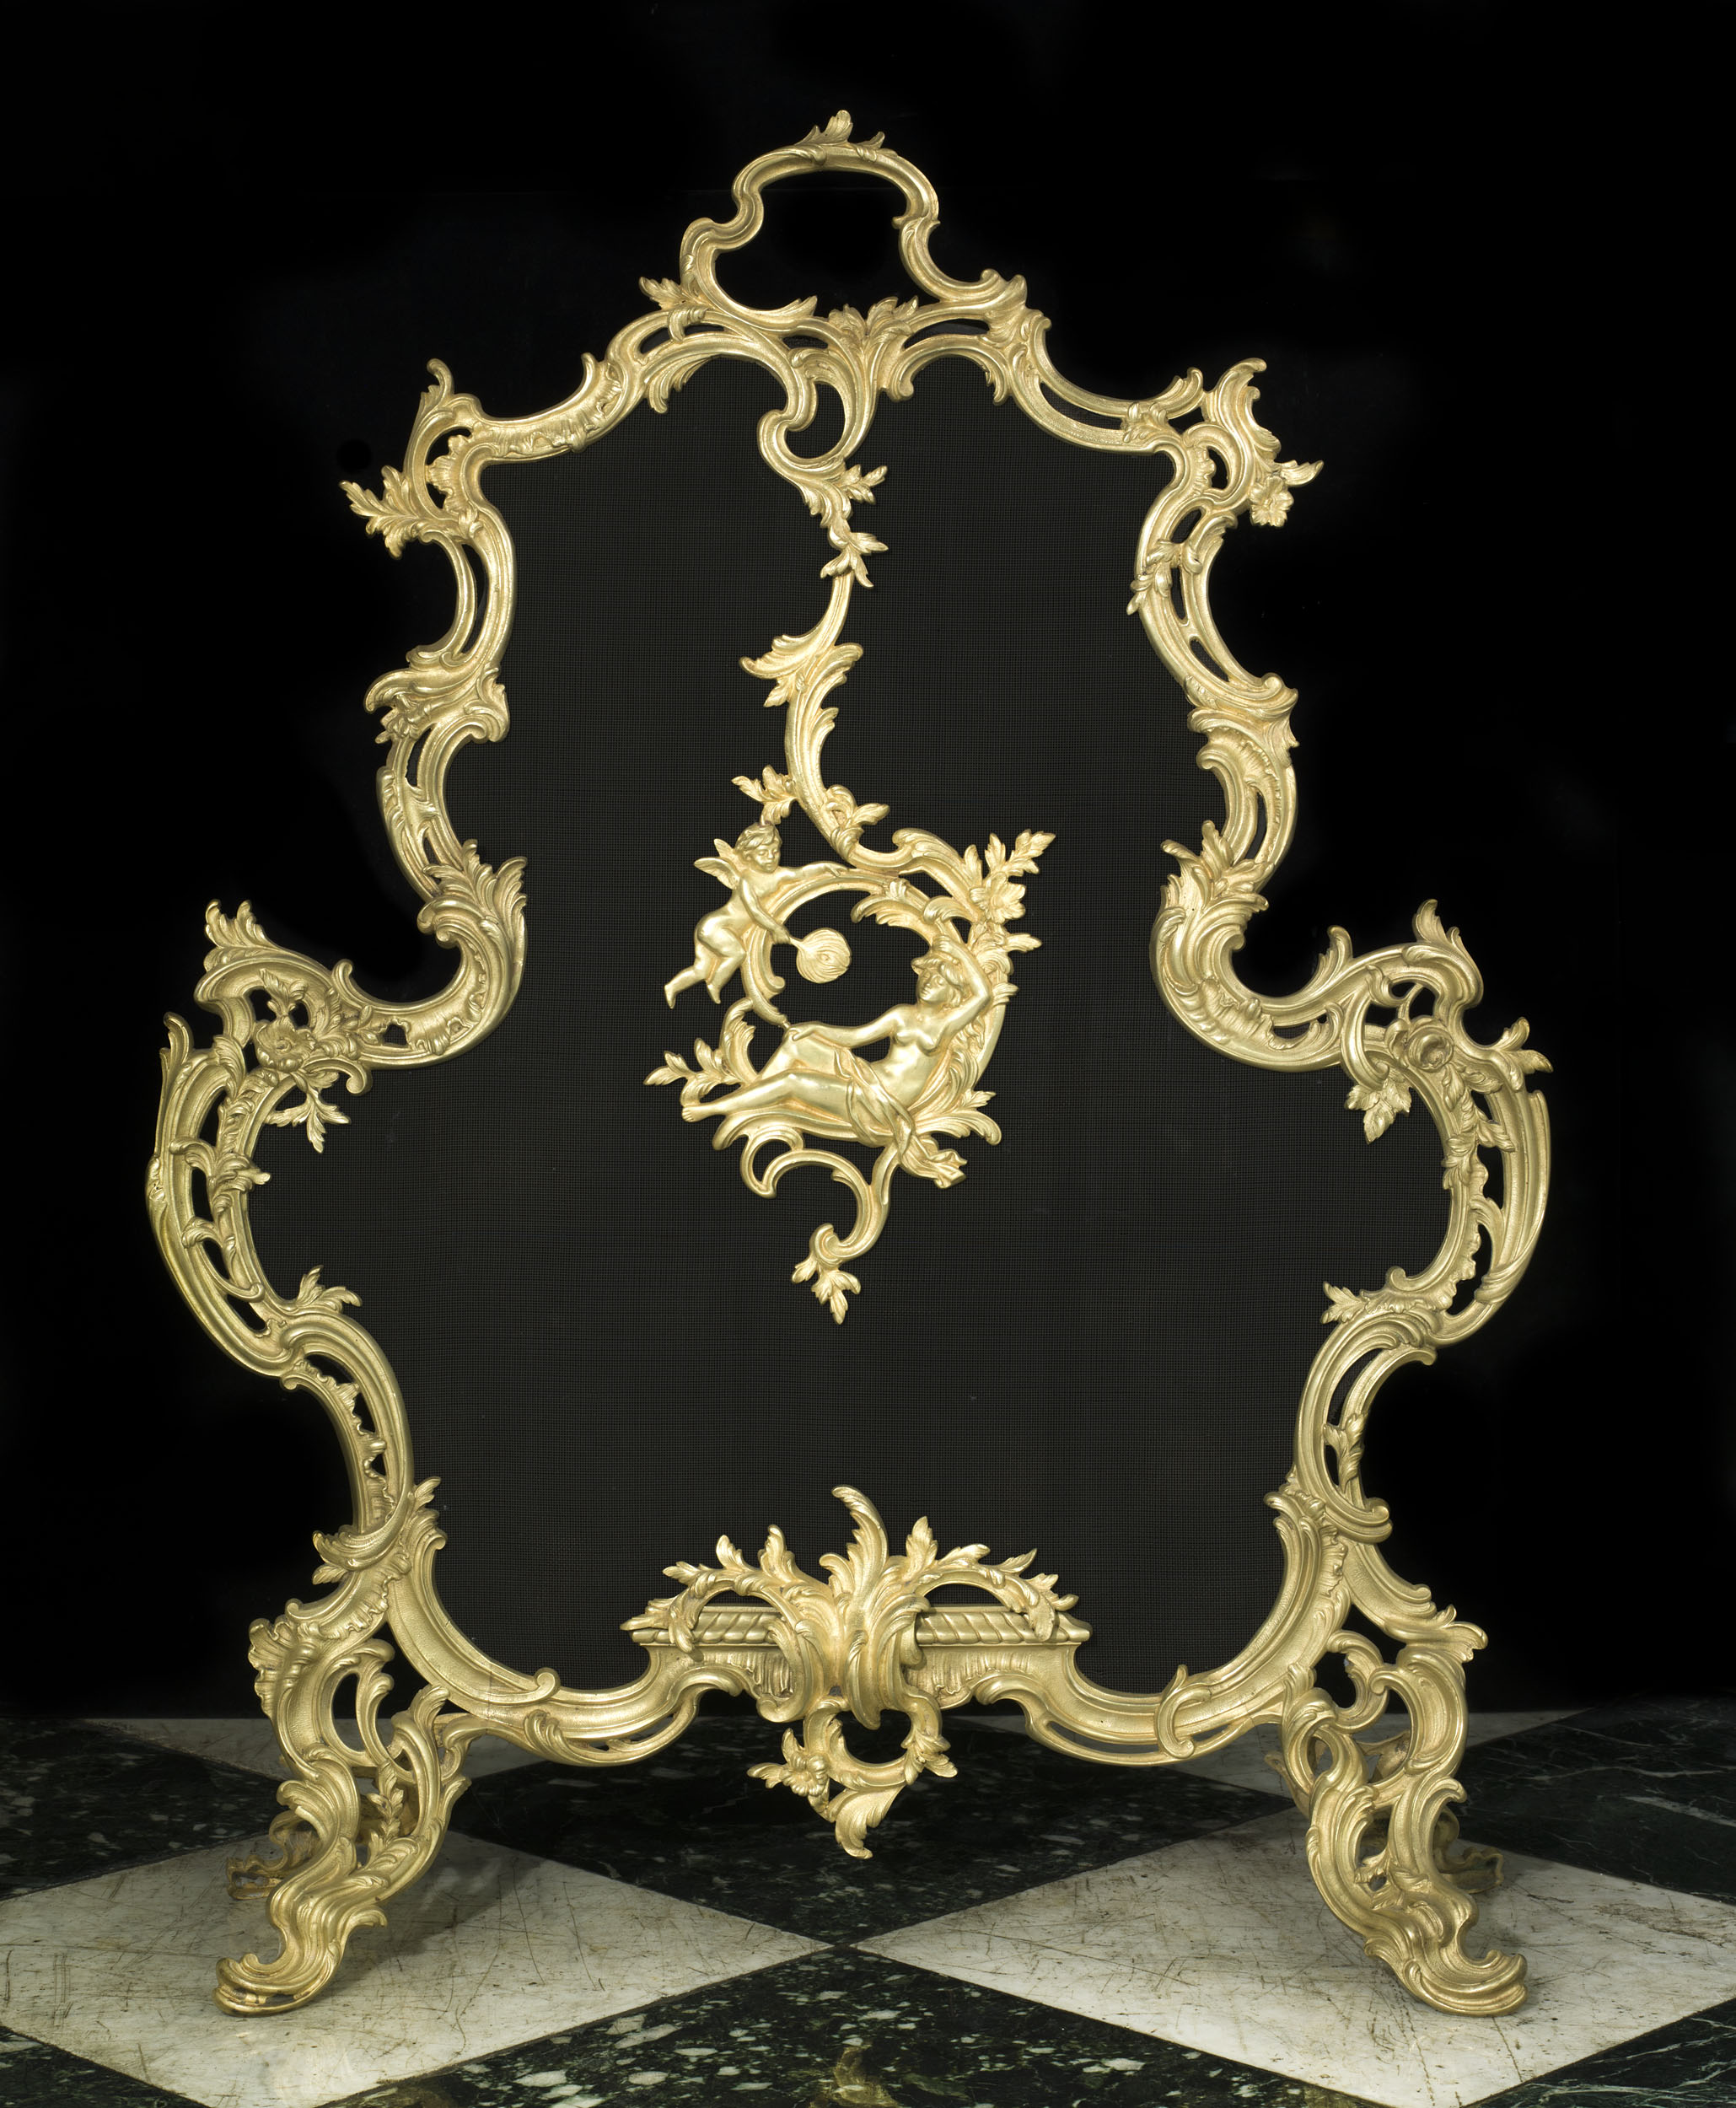 A Large Gilt Rococo Style Fire Screen